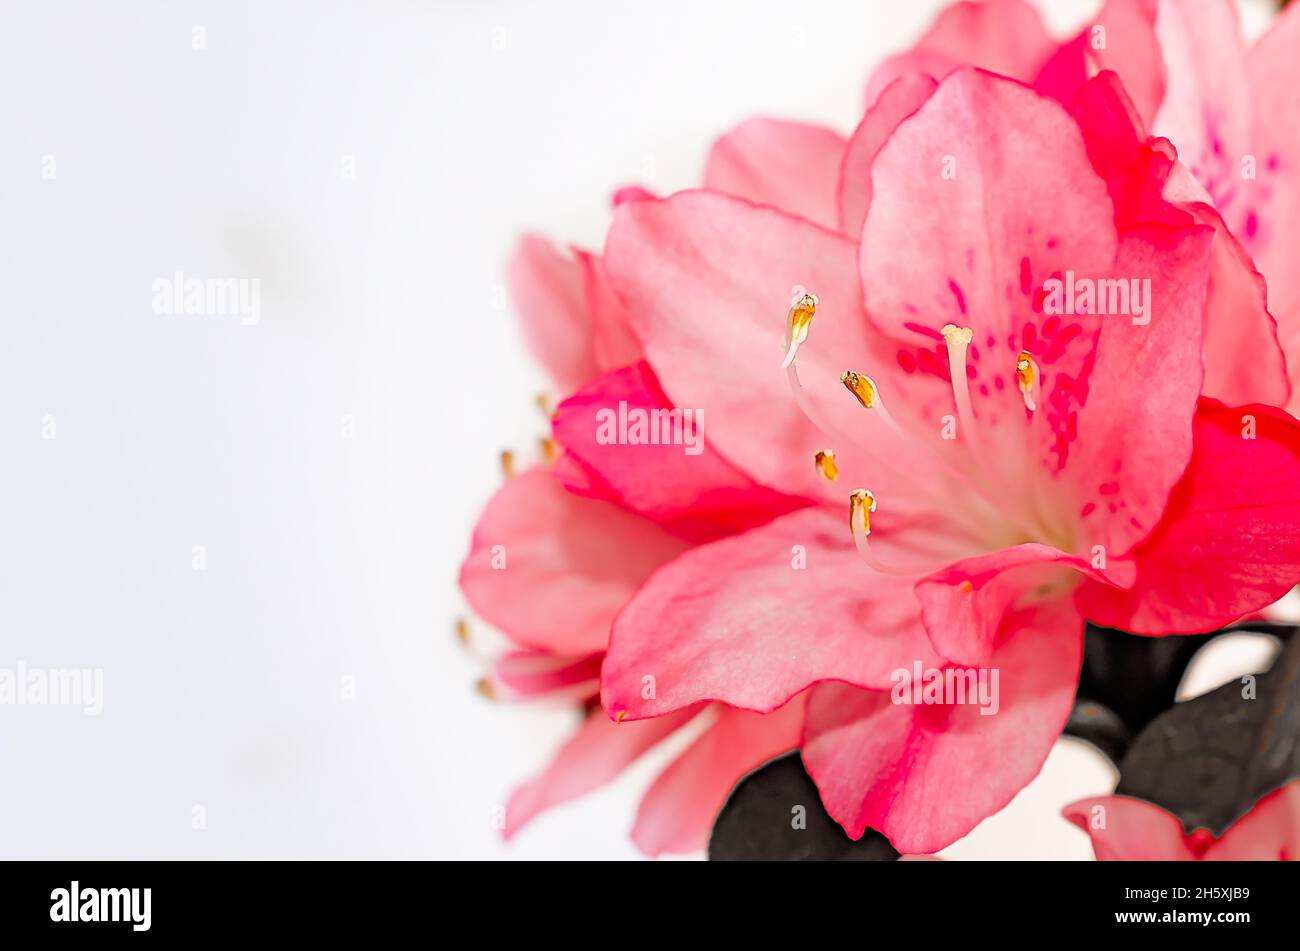 Southern Indian azaleas (Rhododendron indicum) are pictured on white, April 8, 2014, in Mobile, Alabama. Stock Photo